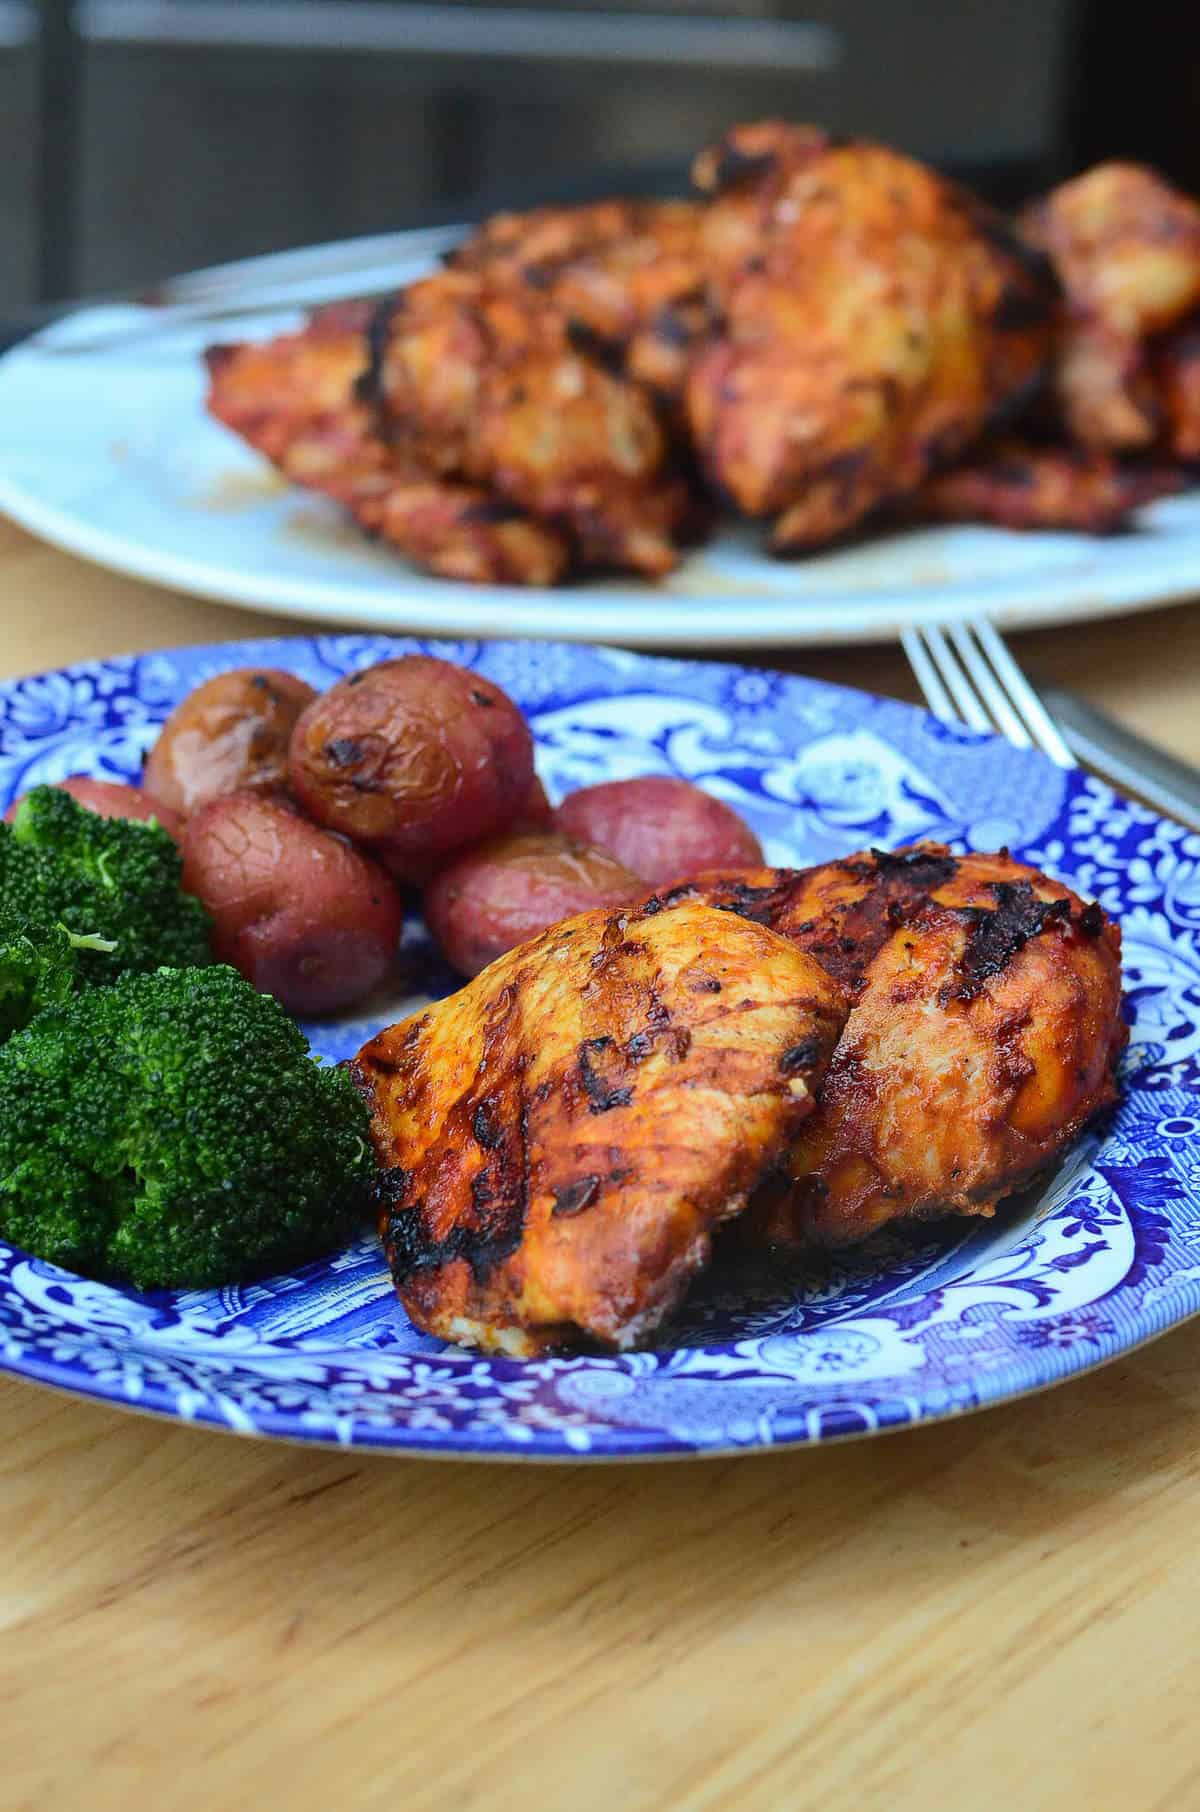 Grilled paprika chicken on a blue plate with broccoli and potatoes.